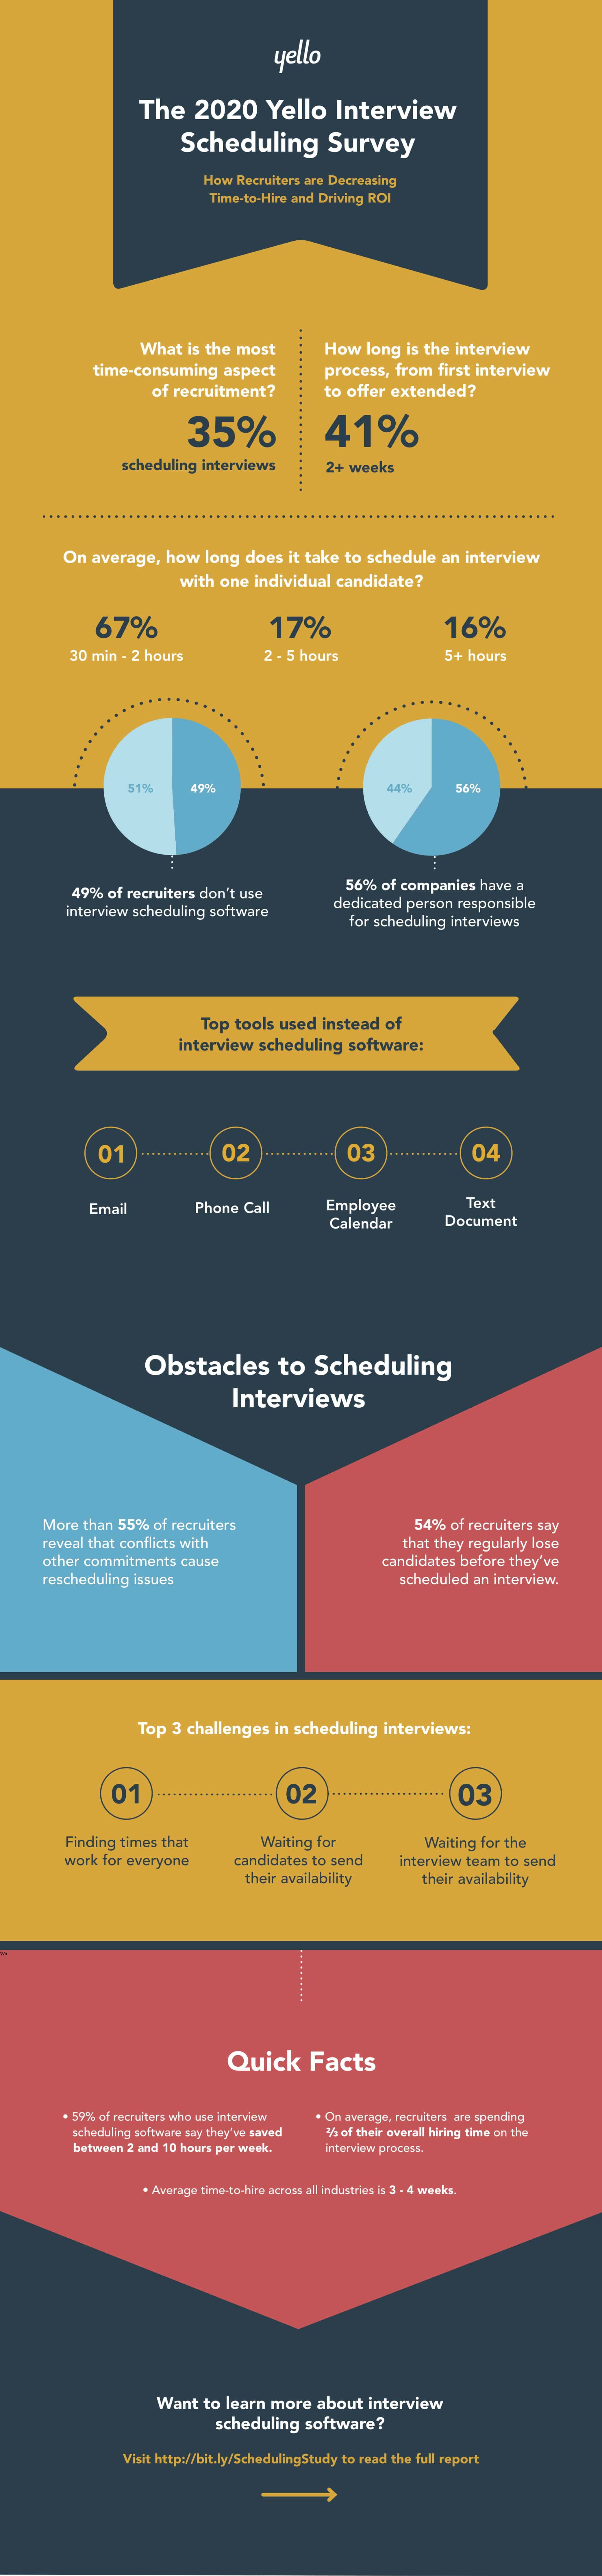 Infographic: The 2020 Yello Interview Scheduling Survey